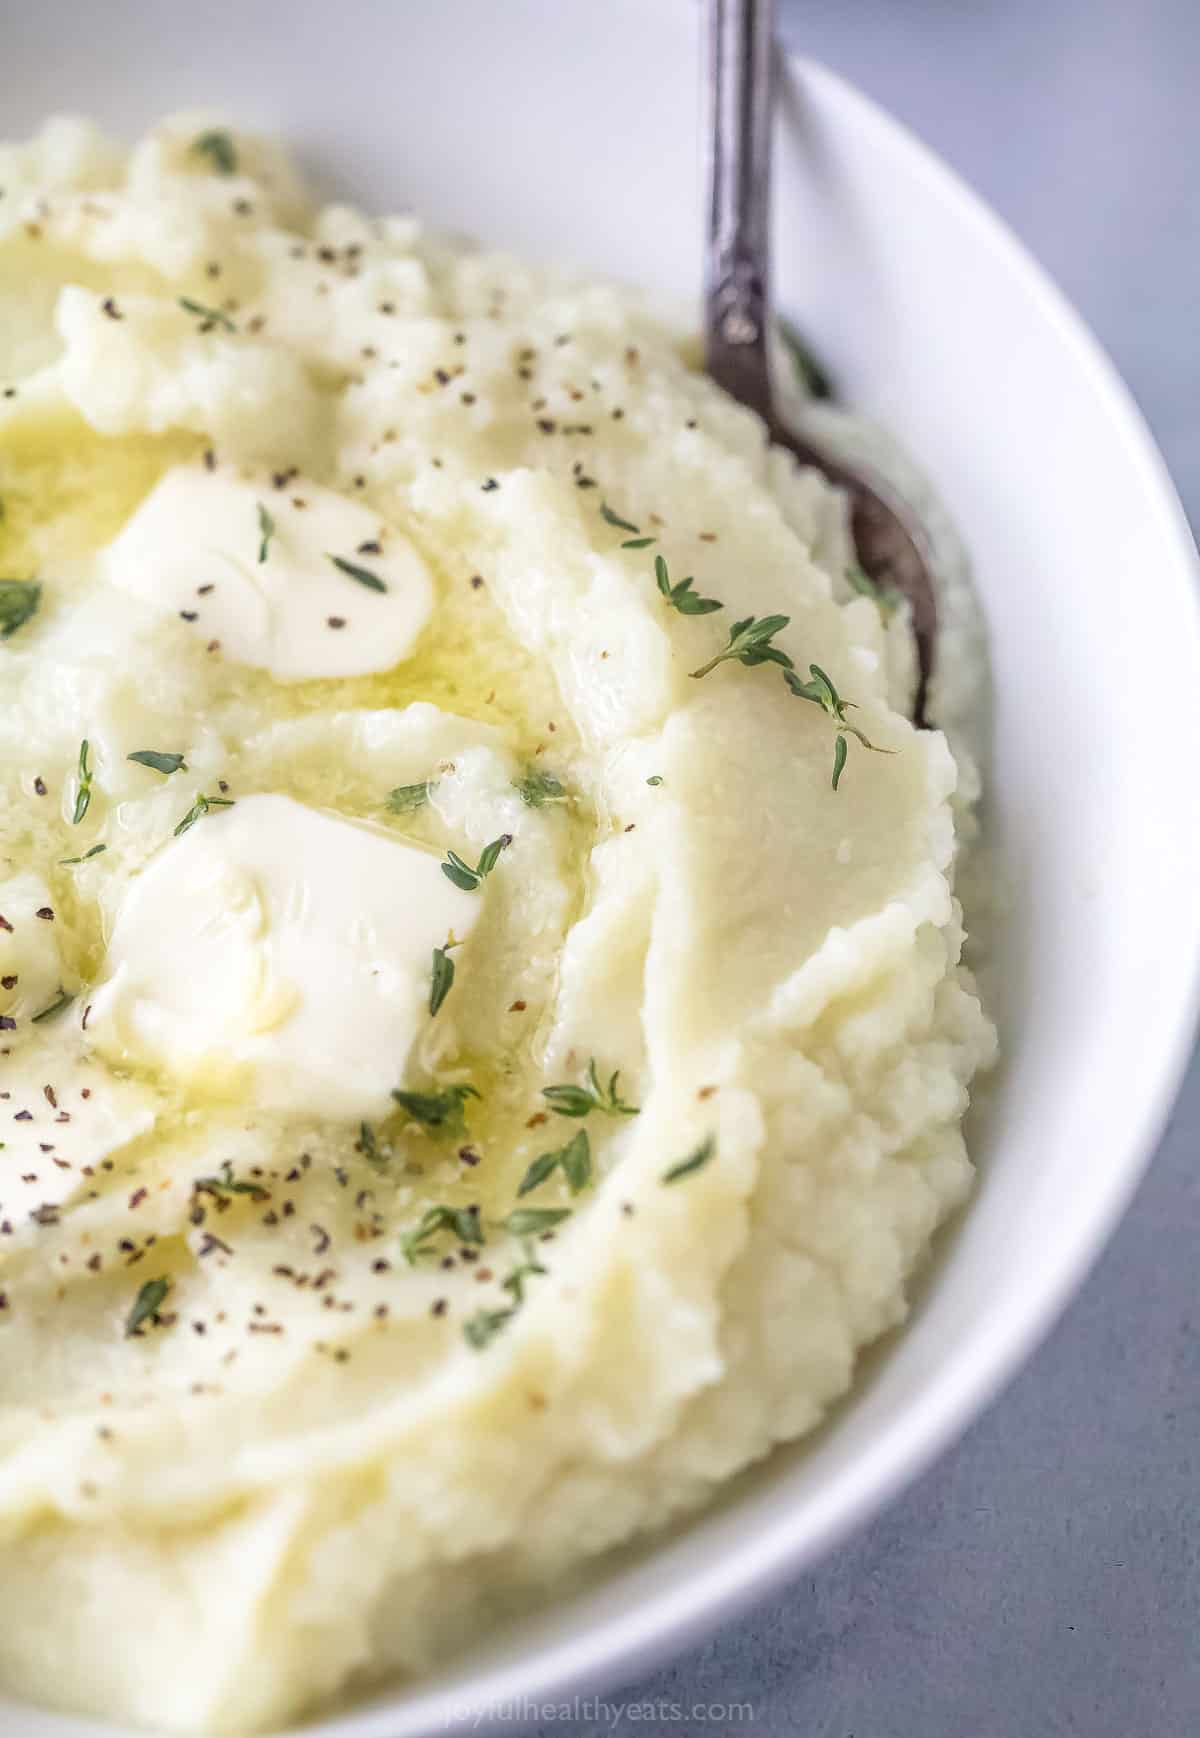 A metal spoon digging into a bowl of creamy mashed cauliflower